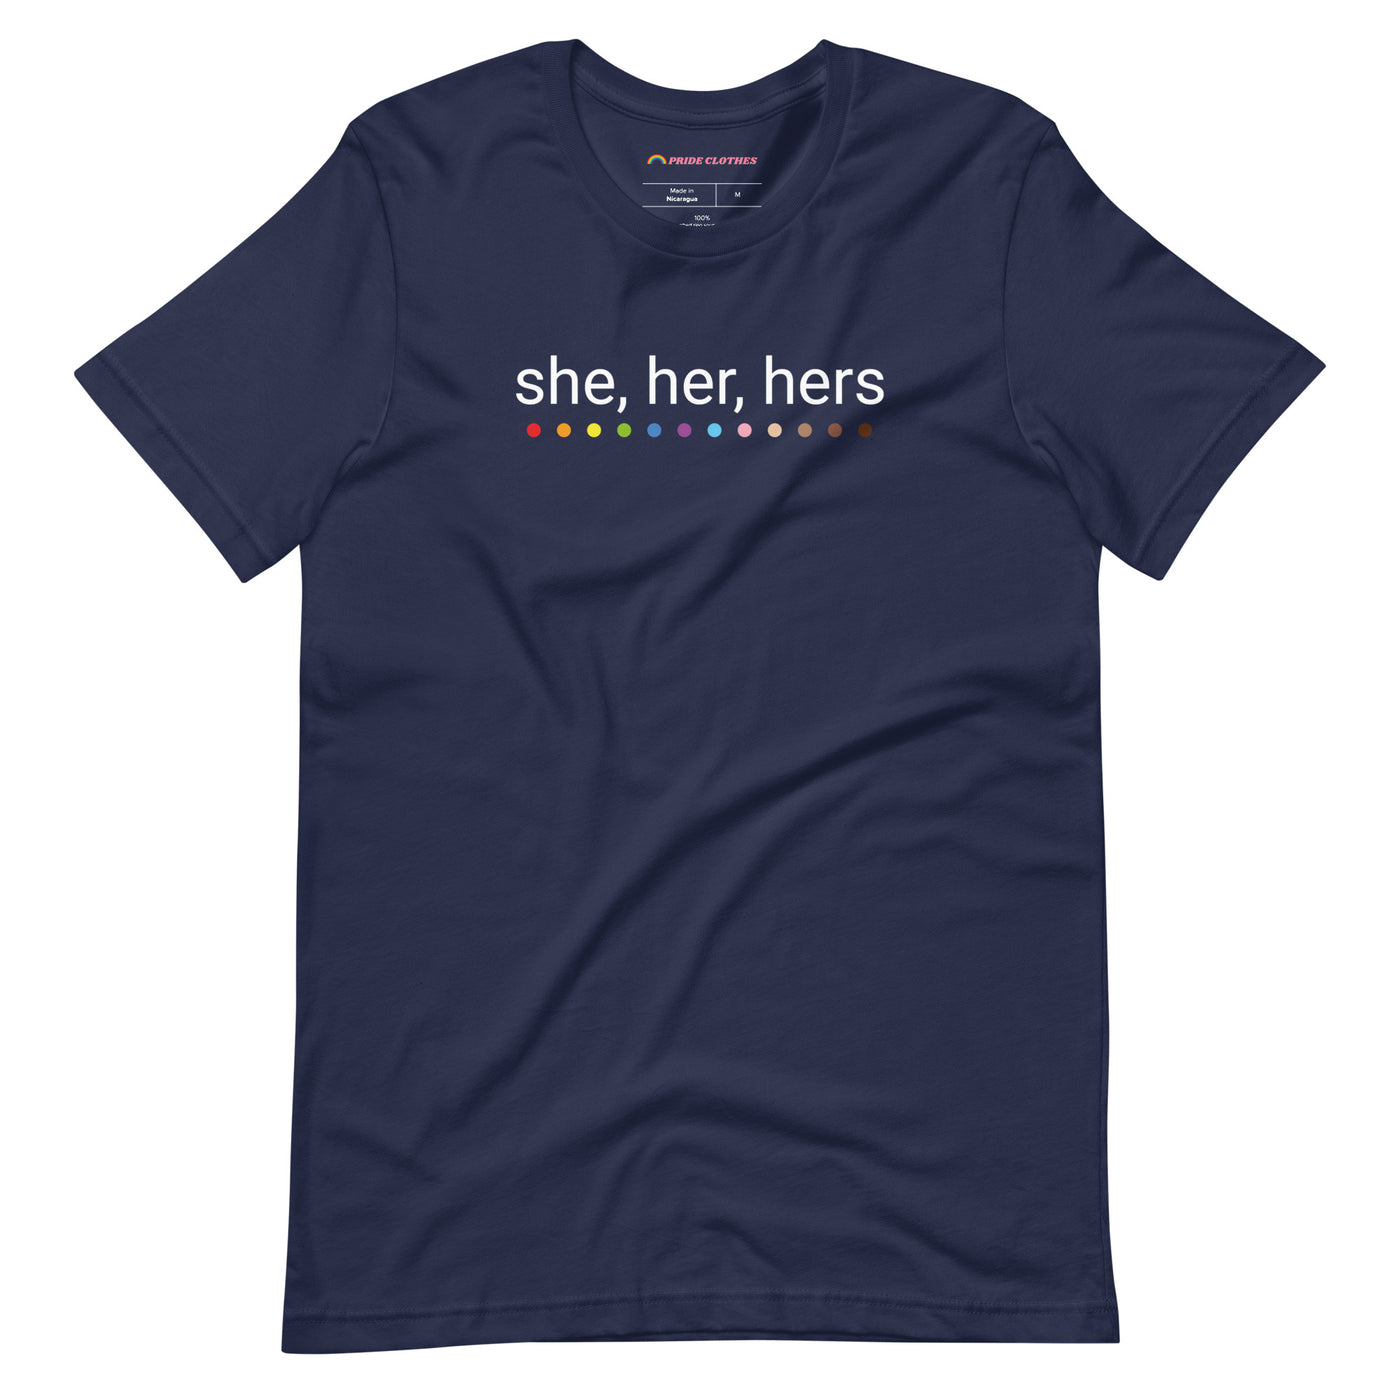 Pride Clothes - She Her Hers These Are My Pronouns T-Shirt - Navy